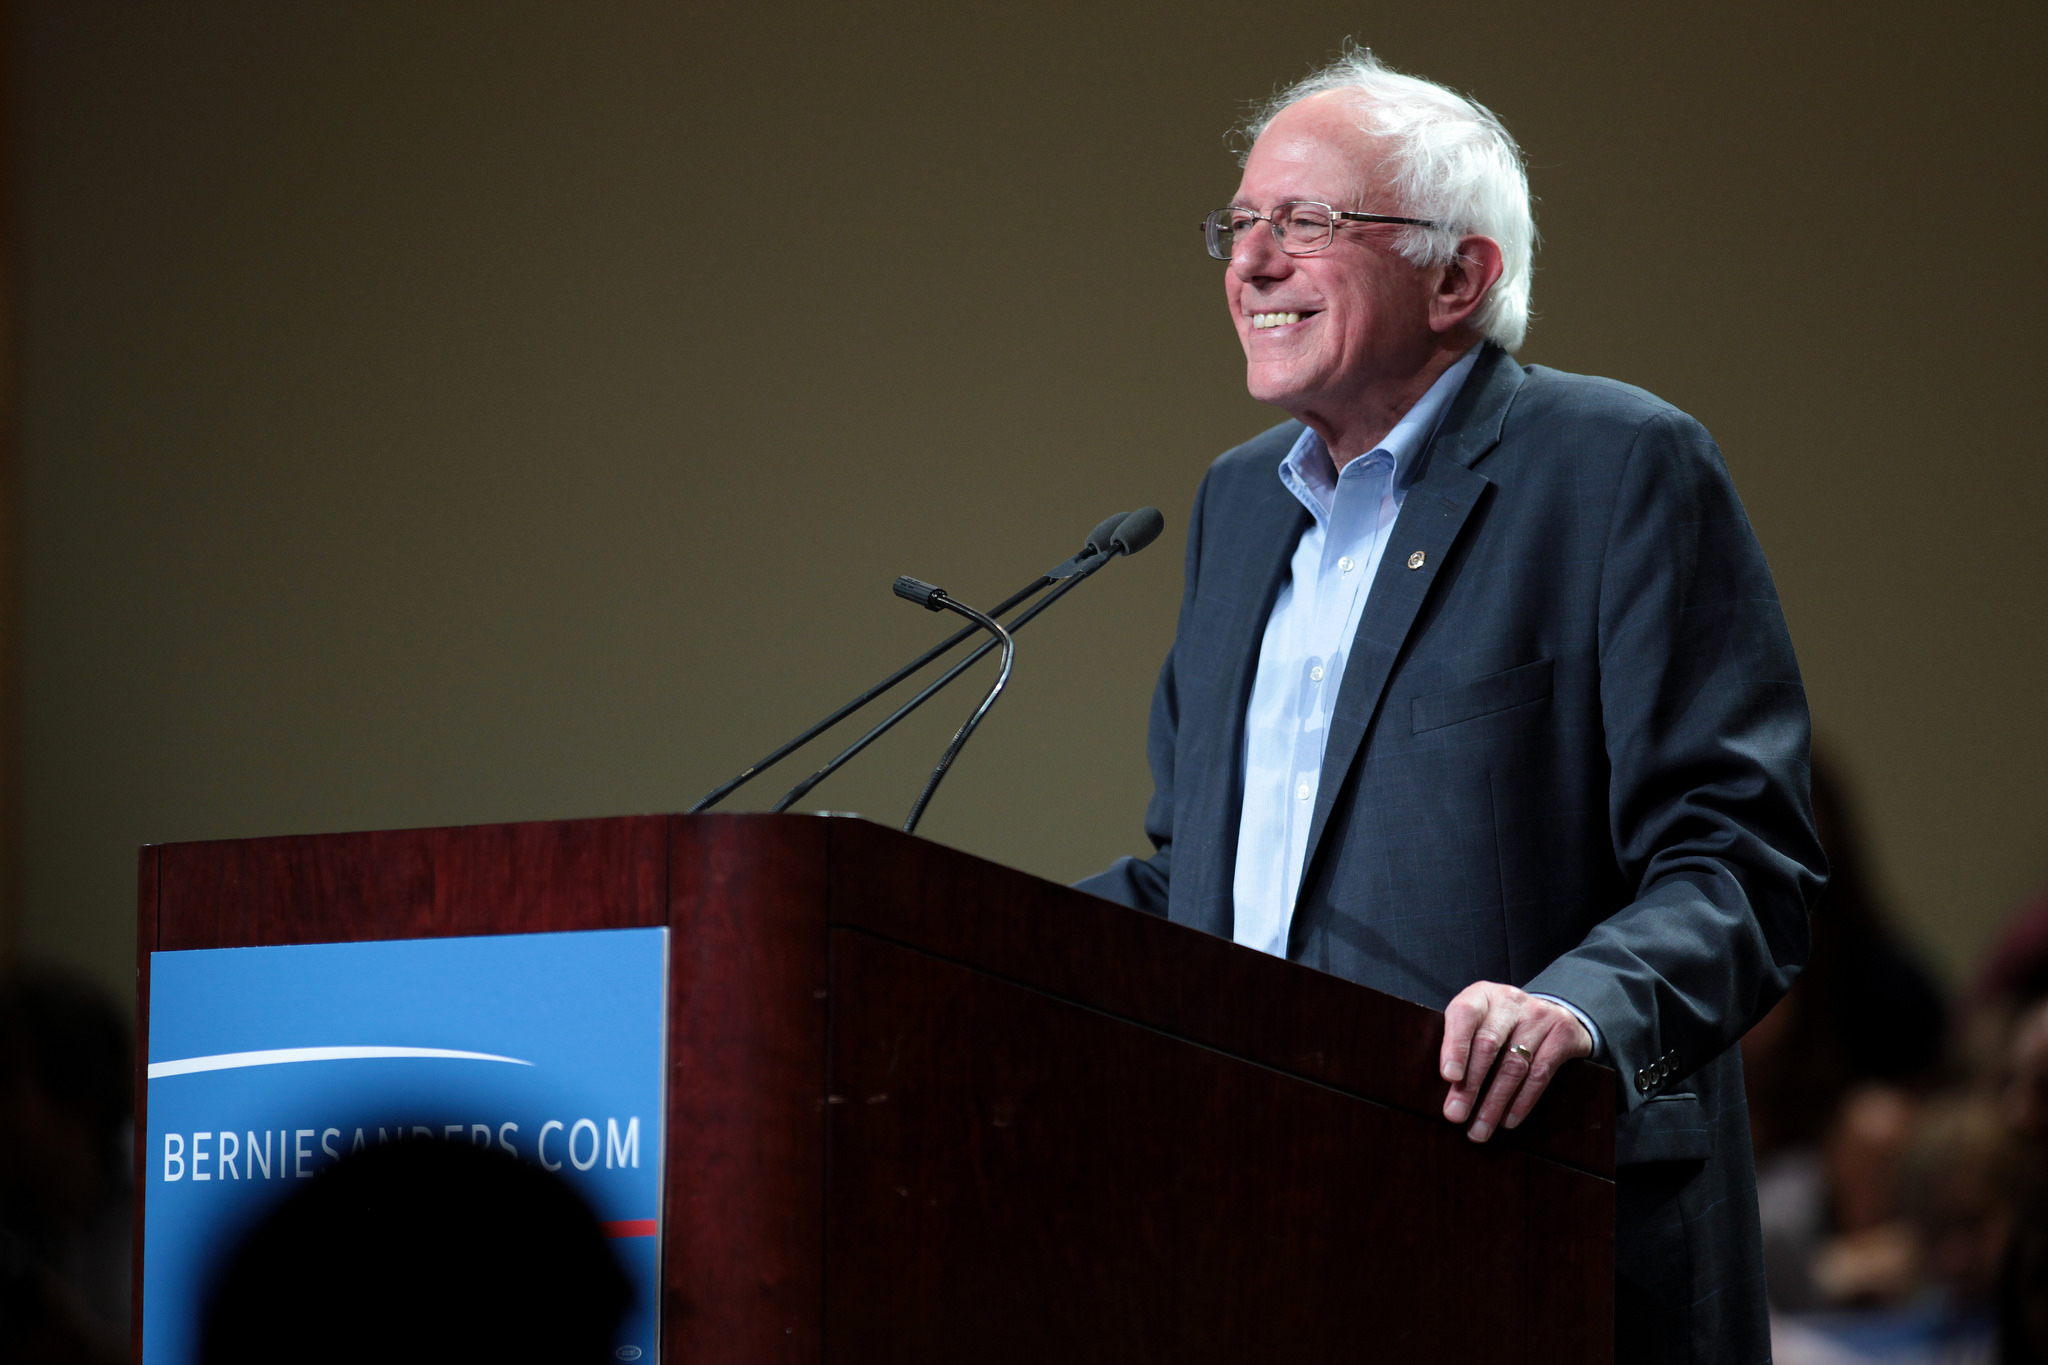 Bernie Sanders speaks at a town meeting at the Phoenix Convention Center in Phoenix, Arizona. | <a href="https://www.flickr.com/photos/gageskidmore/19197909424">Supplied by Gage Skidmore</a>